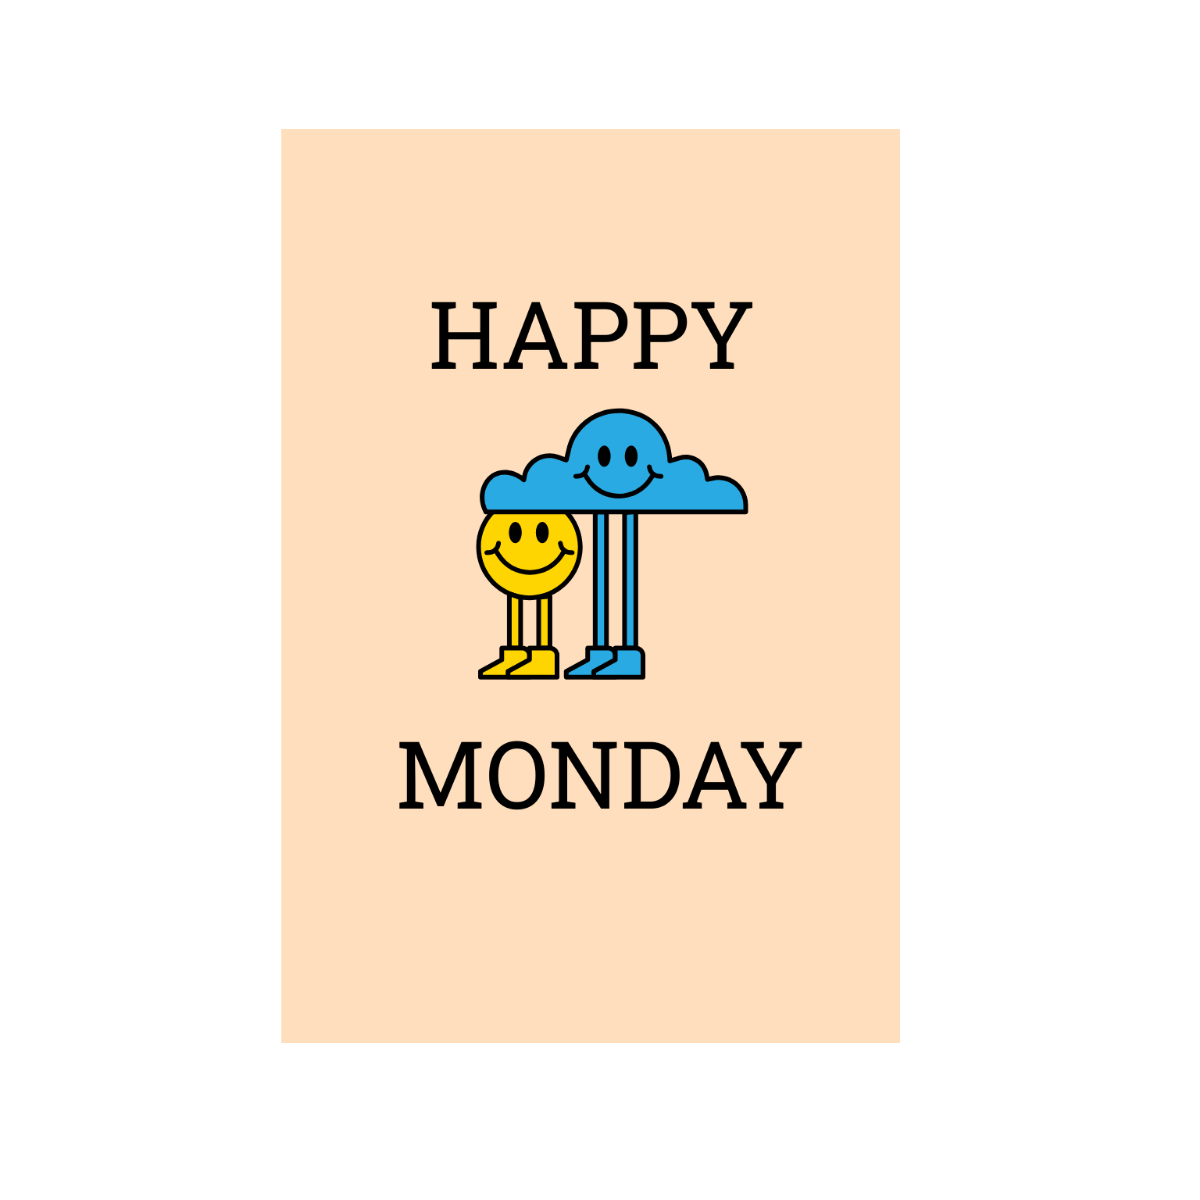 Happy Monday Card Vector Template